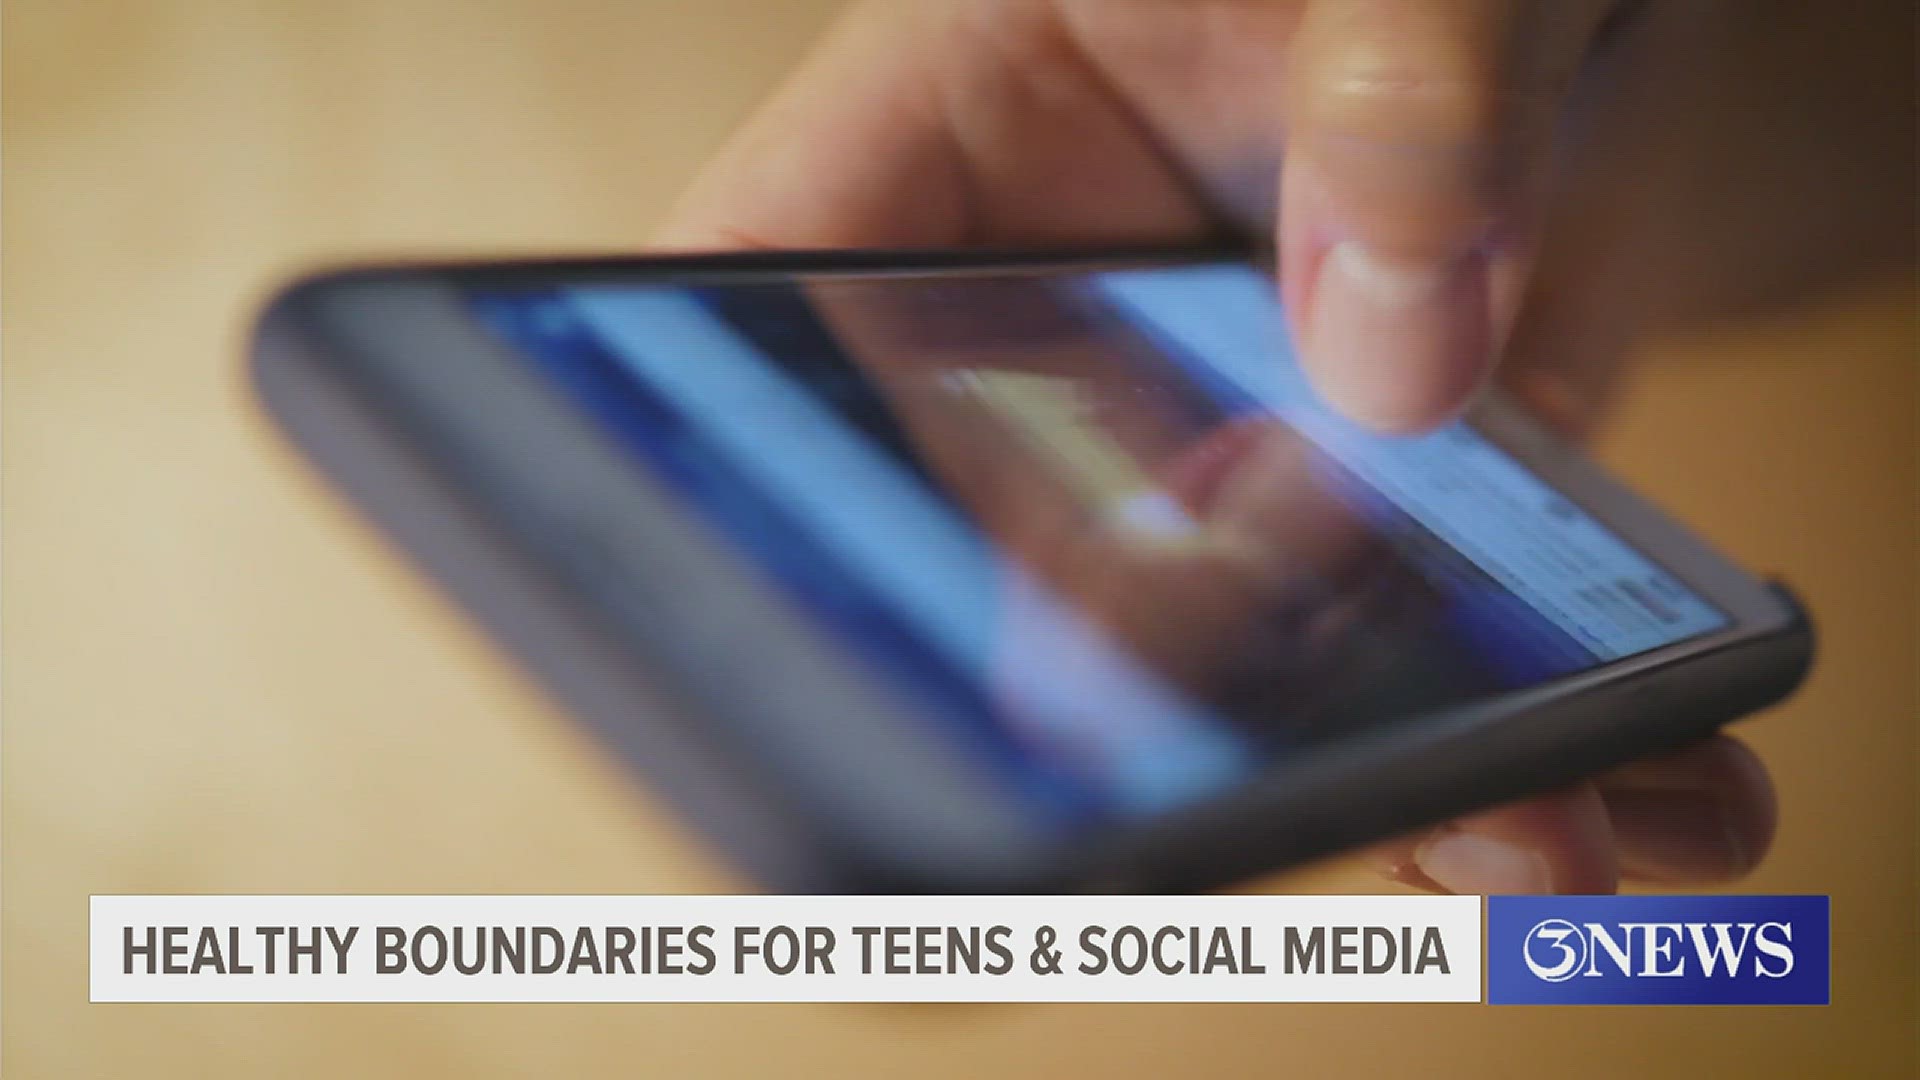 Experts with Driscoll Children's Hospital and a Coastal Bend native pageant queen weigh in on helpful ways for teens to have healthier boundaries with social media.